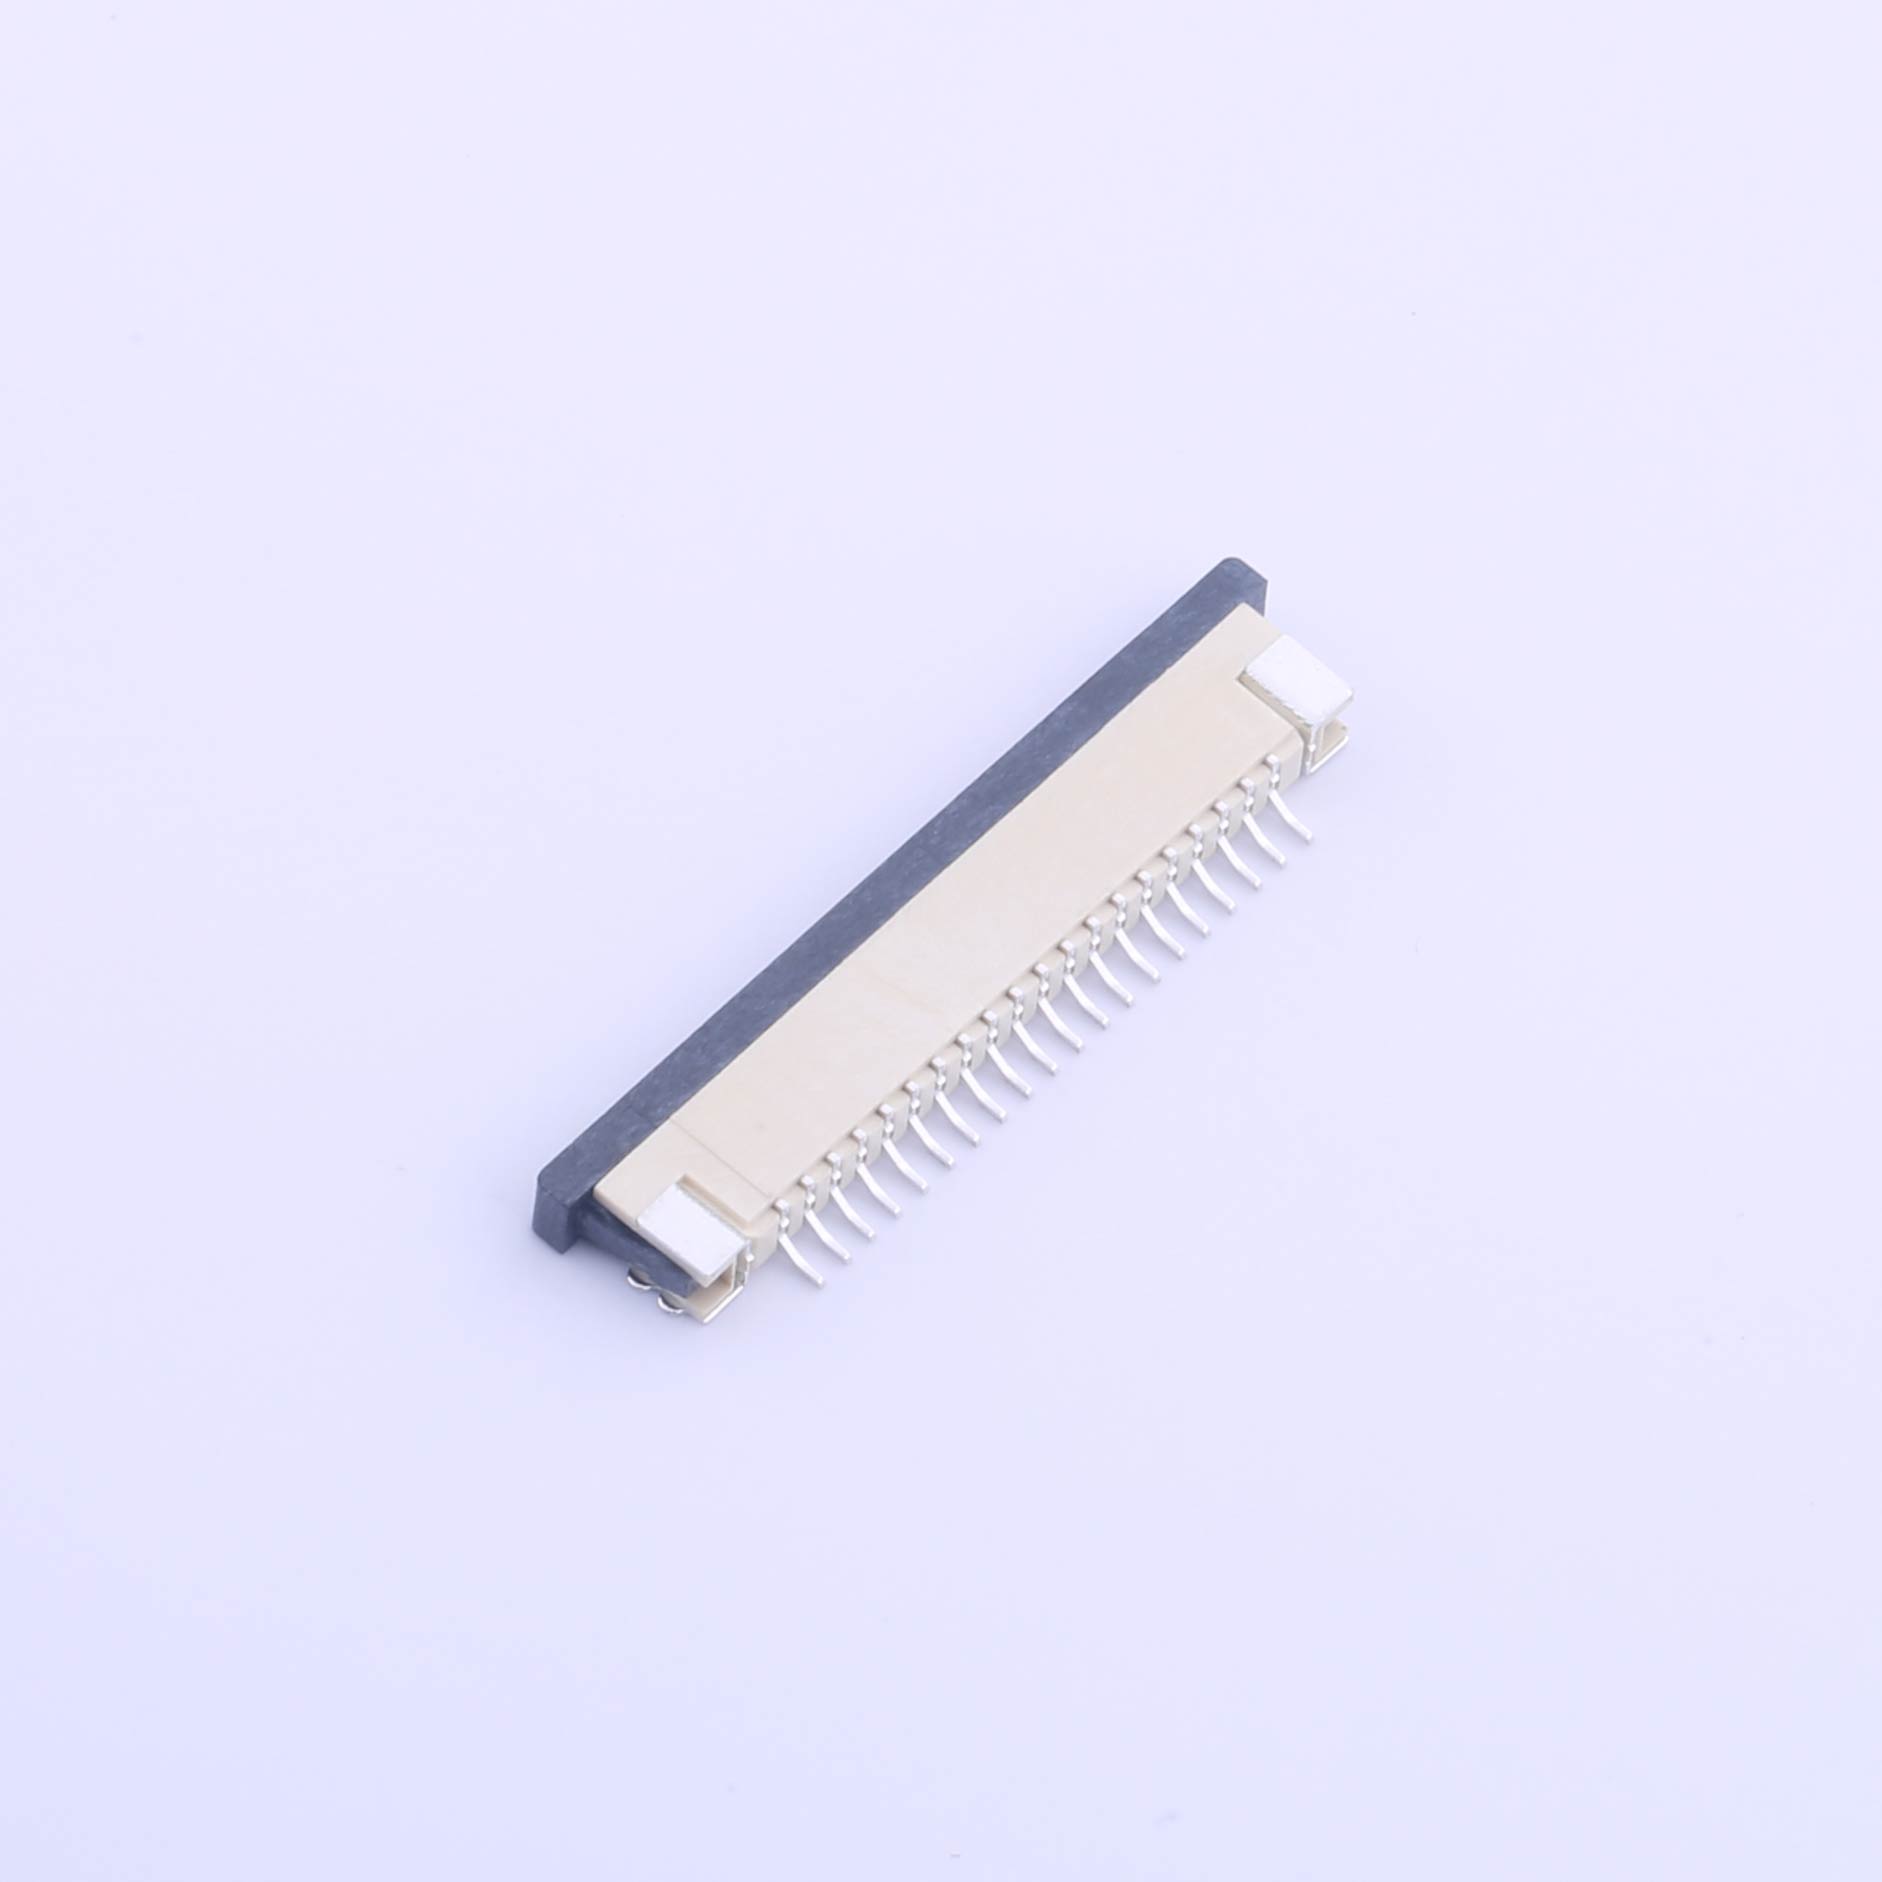 Kinghelm FFC/FPC Connector 20P Pitch 1mm - KH-CL1.0-H2.5-20ps